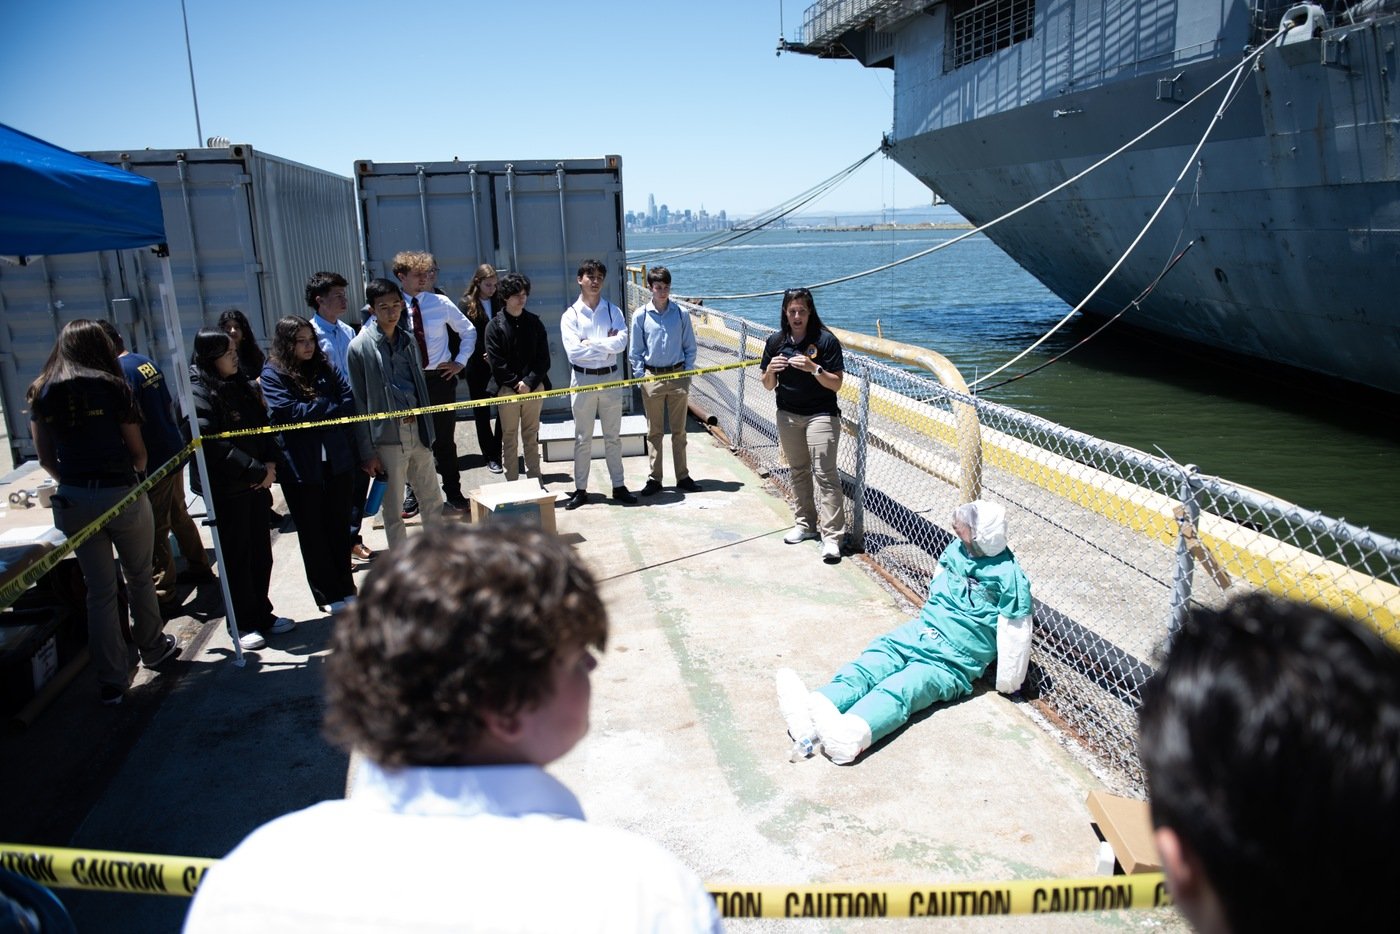 The Evidence Response Team (or ERT) lead teaches students about evidence collection in a mock crime scene on the pier during FBI San Francisco's Summer 2023 Teen Academy, held in Alameda, California.